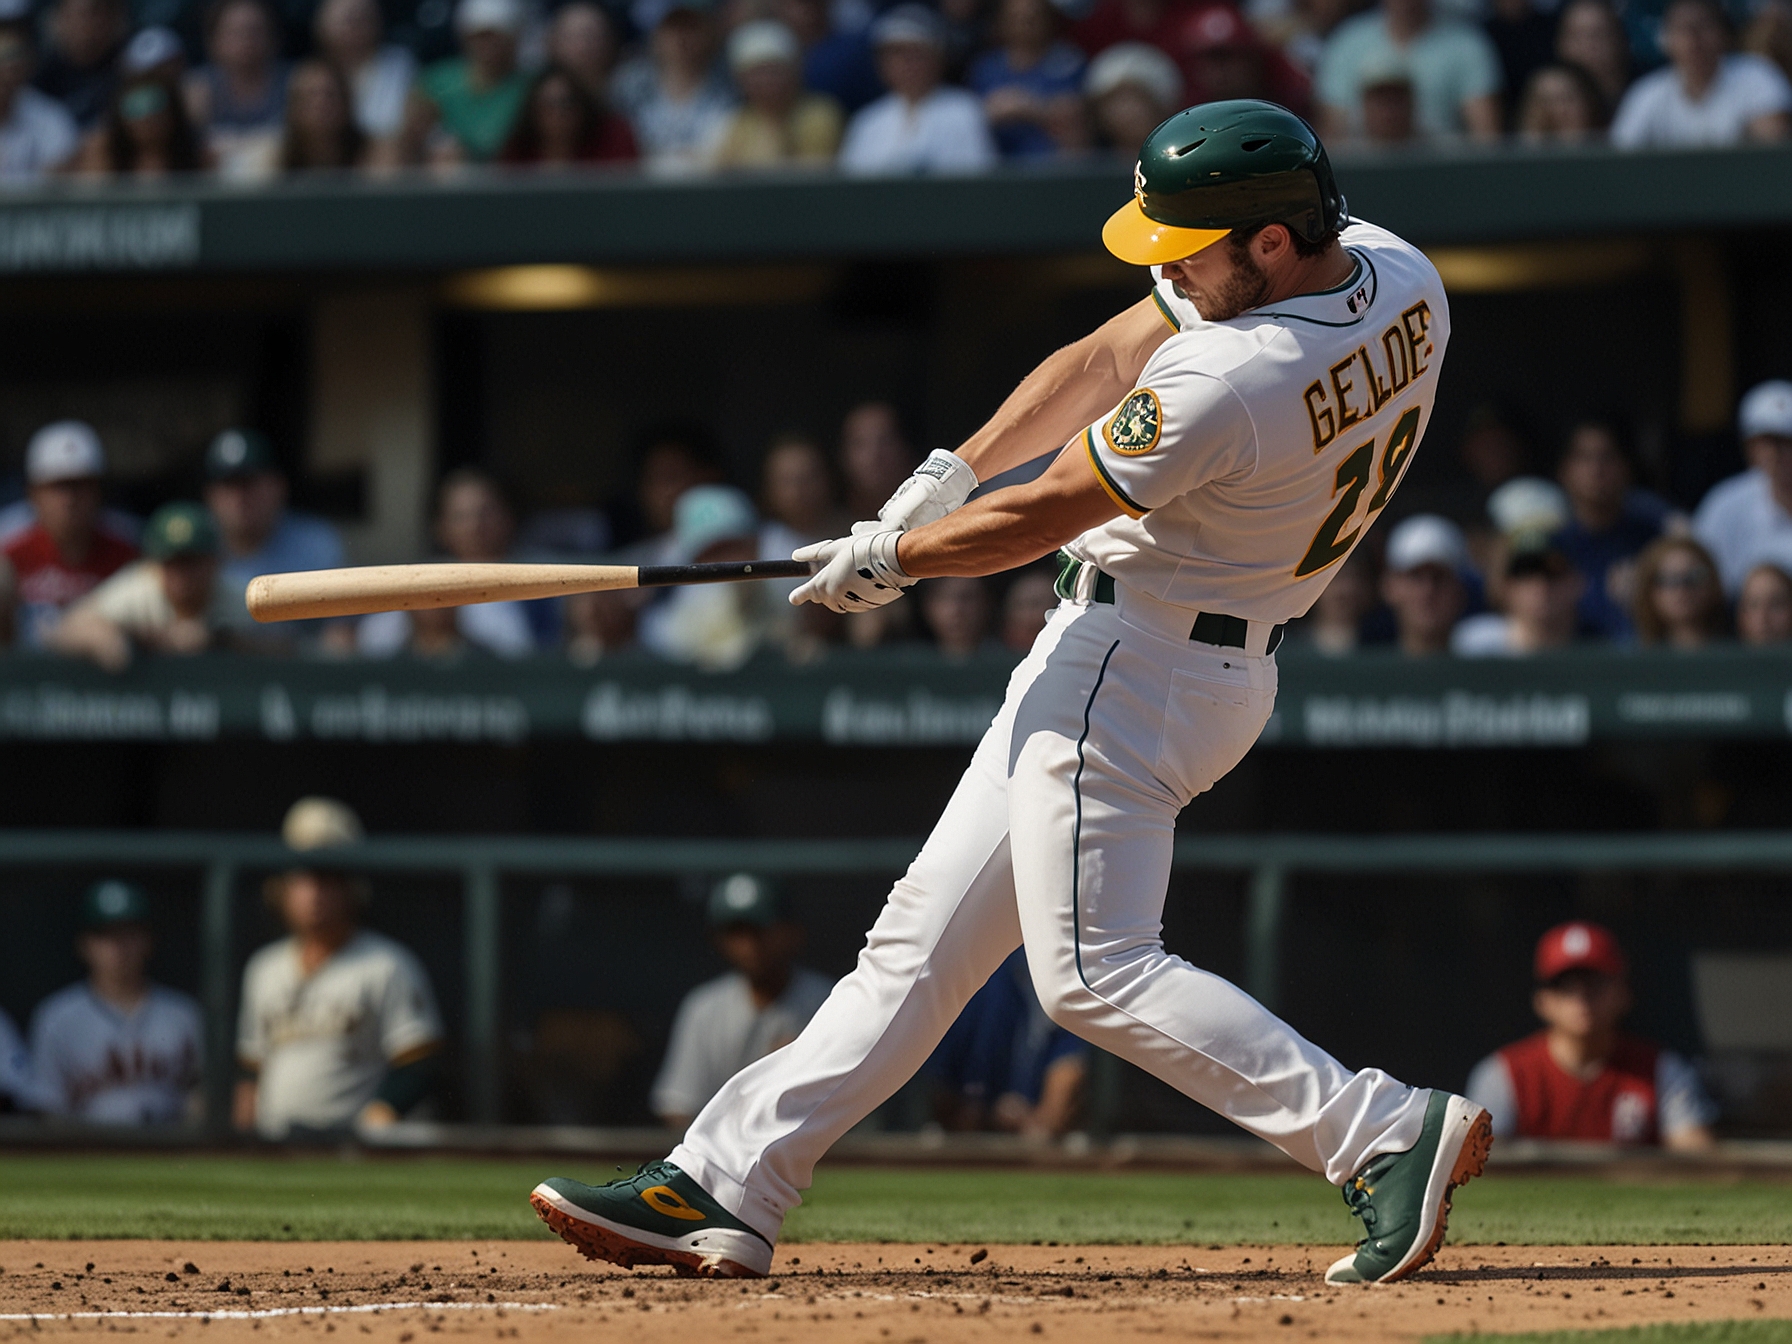 Zack Gelof of the Oakland Athletics hits a critical triple during the eighth inning, sparking a three-run surge that secured a 9-4 victory over the Arizona Diamondbacks.